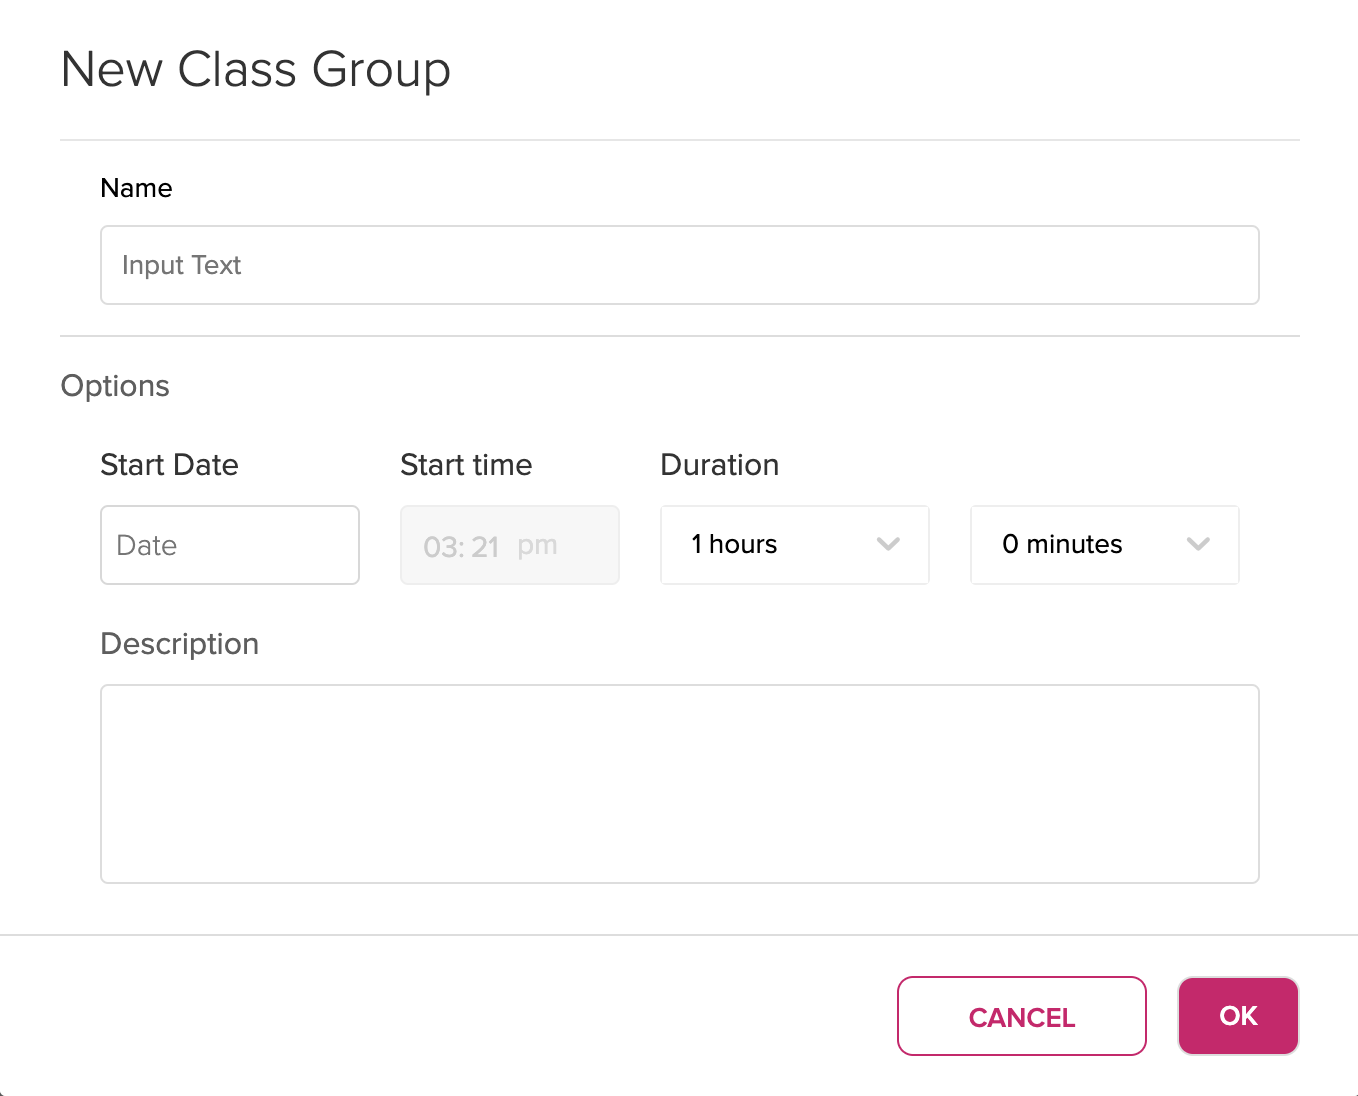 New class group dialog box with name and date and time and description fields for completion as described